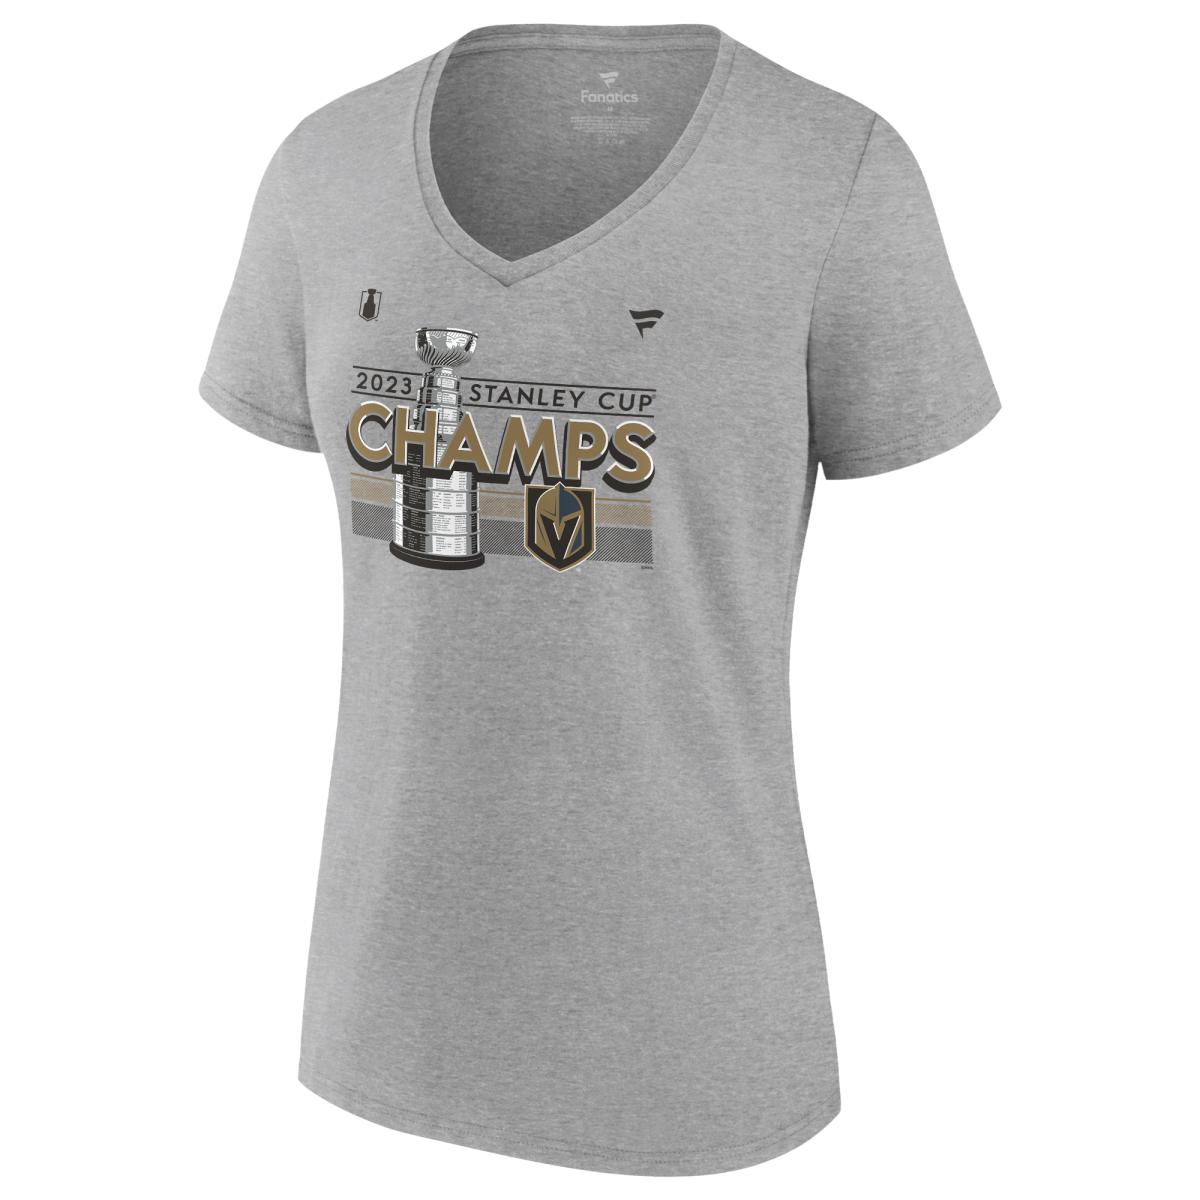 Discounted Vegas Golden Knights Memorabilia, Autographed Knights